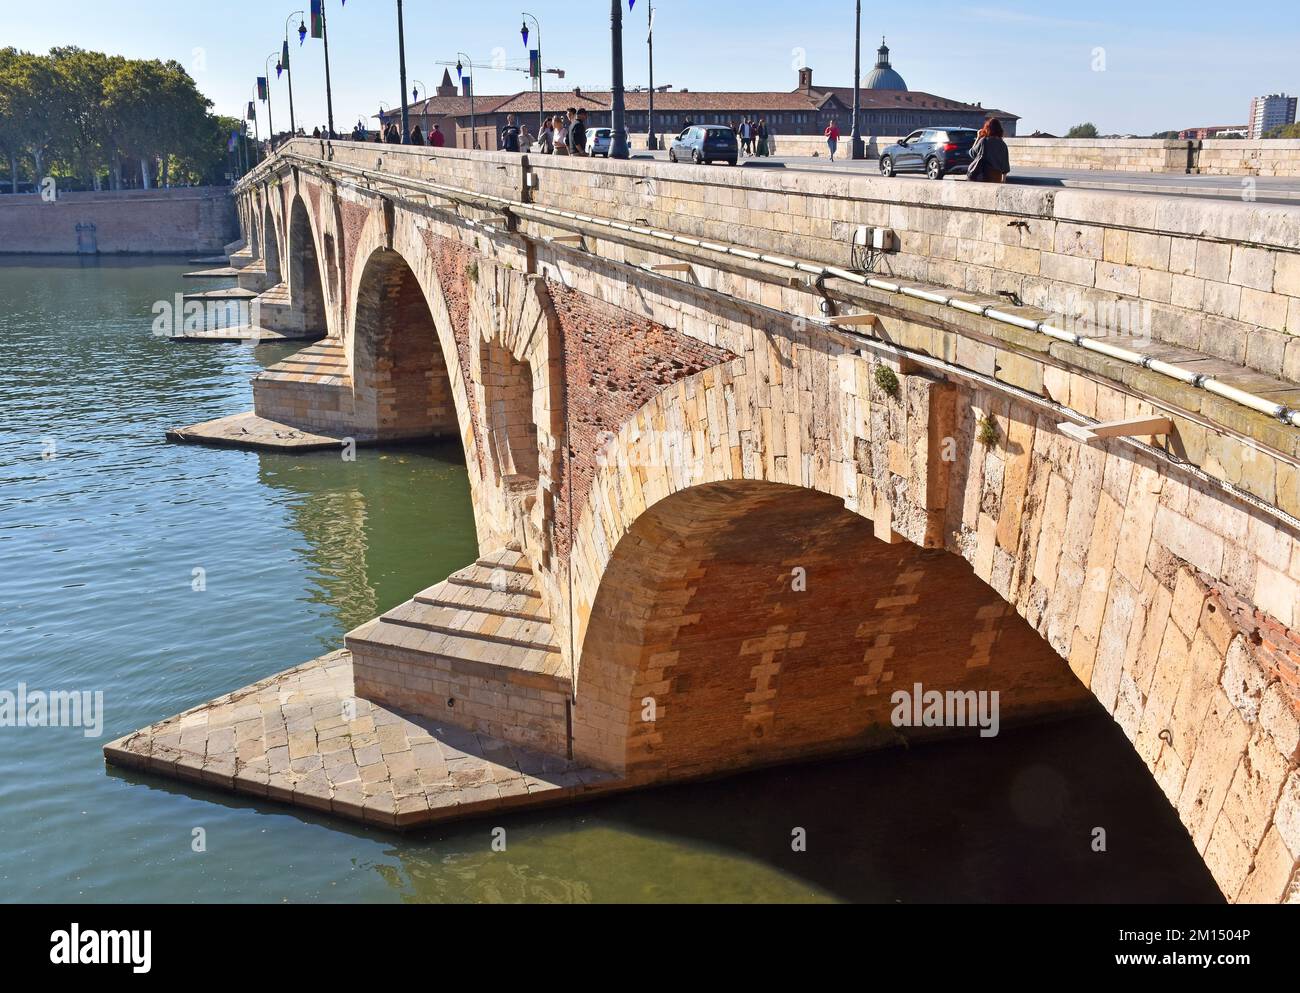 The seven-arched Pont Neuf spanning the river Garonne, Toulouse, France, built 1542-1632; masonry with brick infill panels, a Renaissance masterpiece Stock Photo